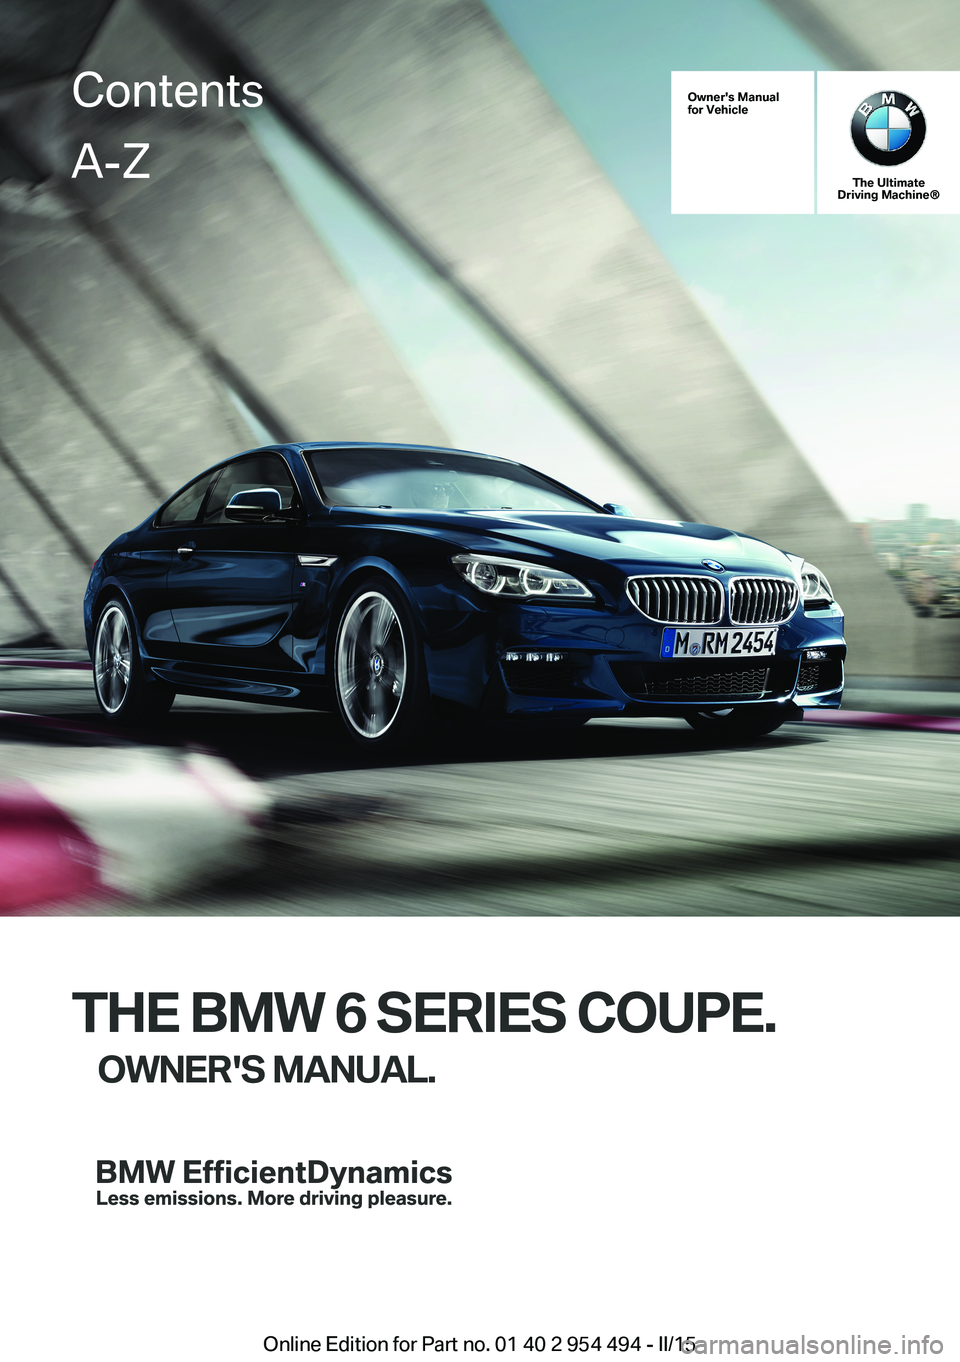 BMW 650I XDRIVE COUPE 2016  Owners Manual Owner's Manualfor Vehicle
The UltimateDriving Machine®
THE BMW 6 SERIES COUPE.
OWNER'S MANUAL.ContentsA-Z
Online Edition for Part no. 01 40 2 954 494 - II/15   